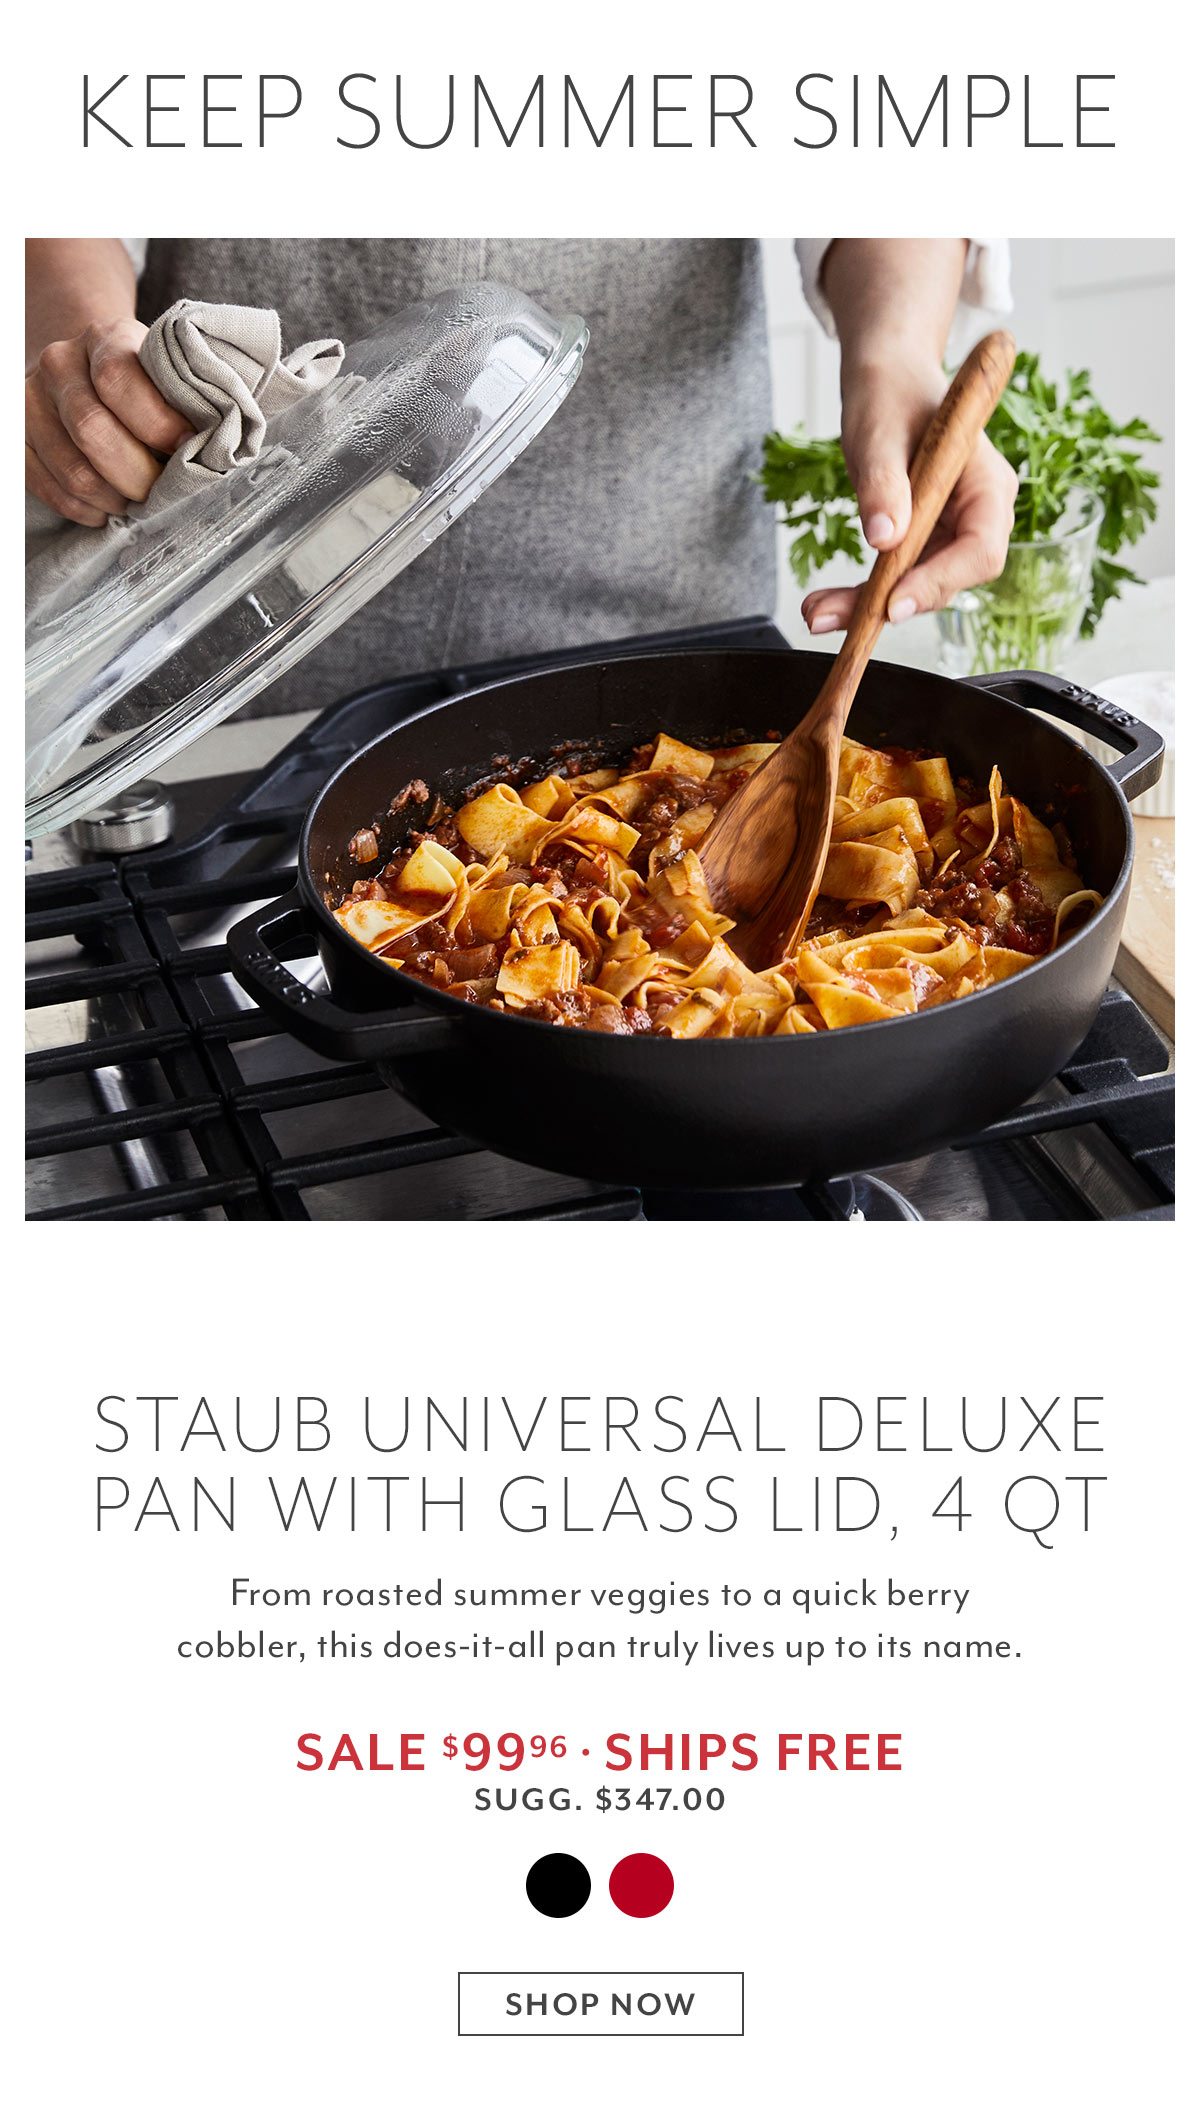 Staub Universal Deluxe Pan with Glass Lid, 4 QT